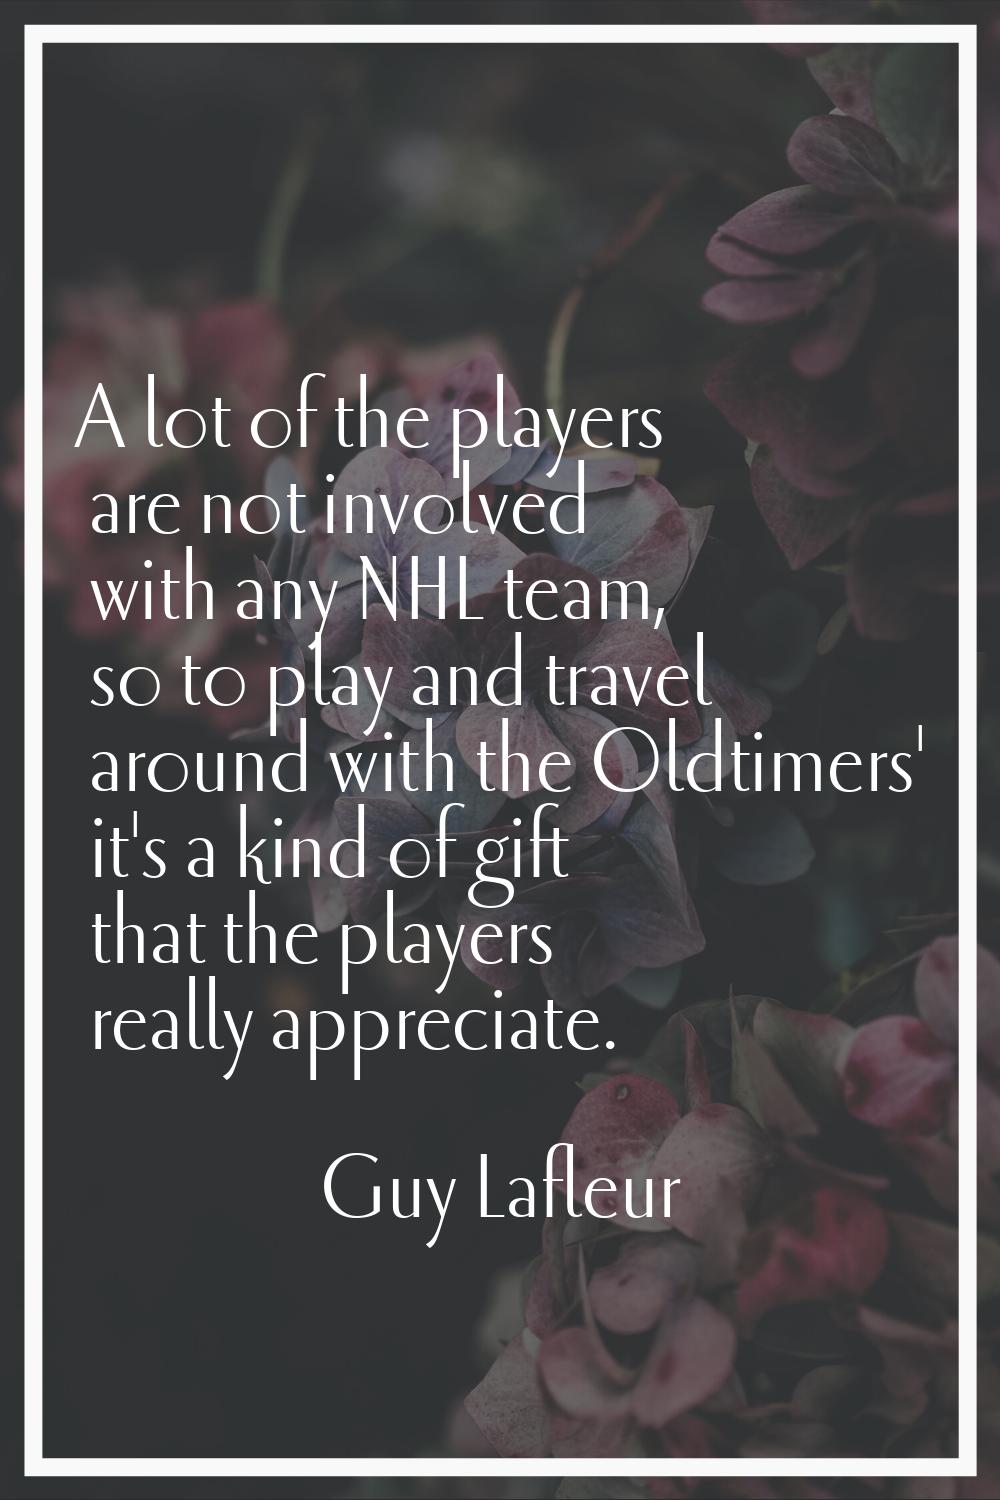 A lot of the players are not involved with any NHL team, so to play and travel around with the Oldt